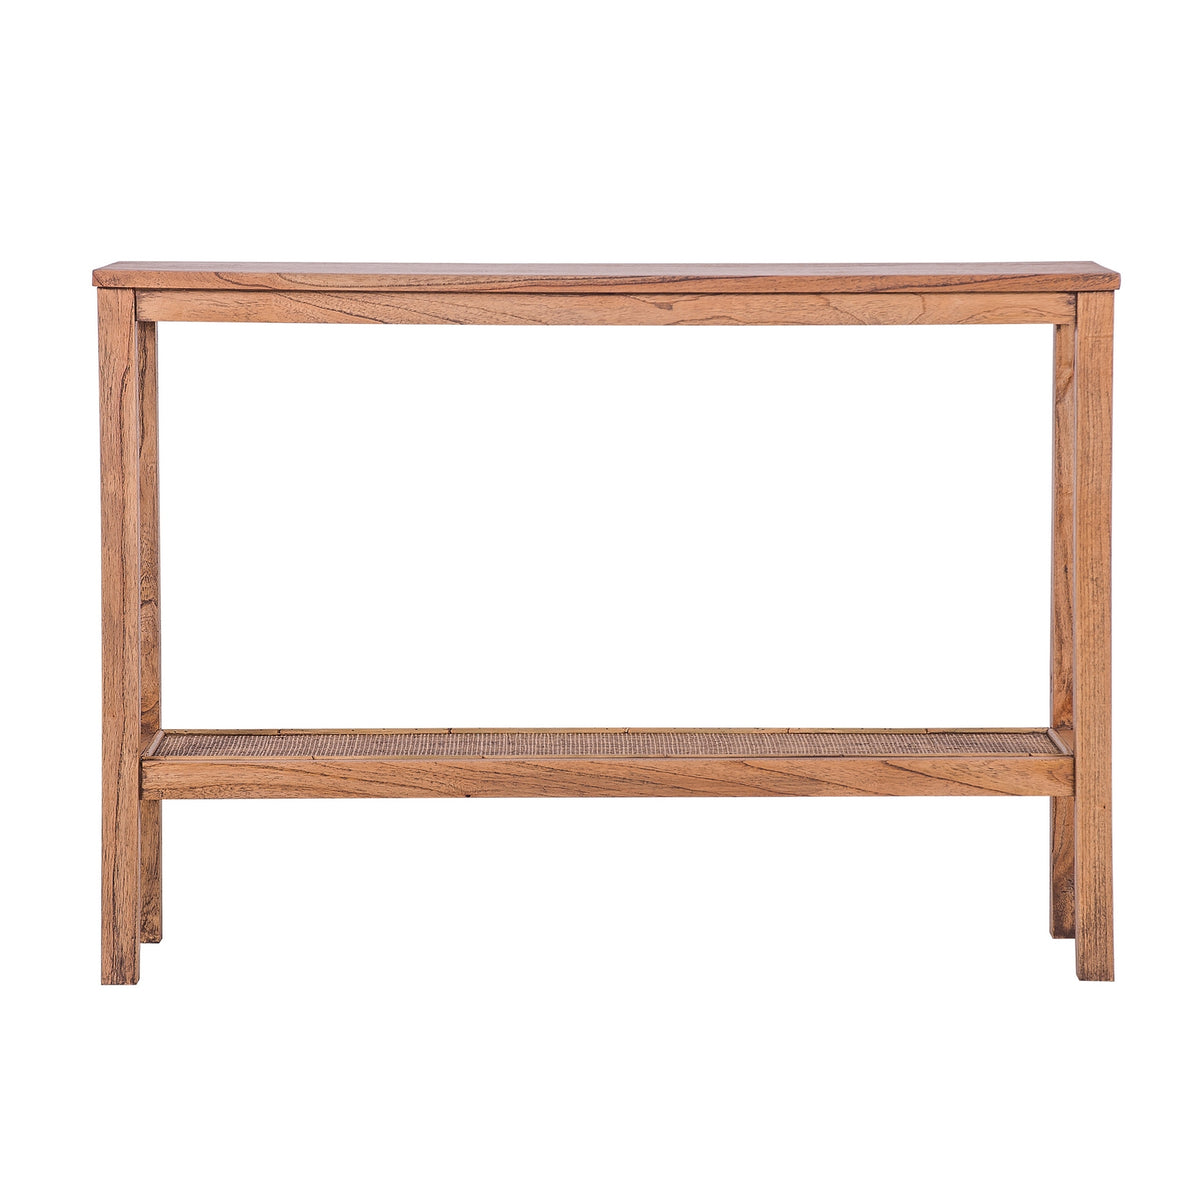 Jasmine Console Table with Mindi Timber Wood Rattan in Brown - 110cm - Notbrand